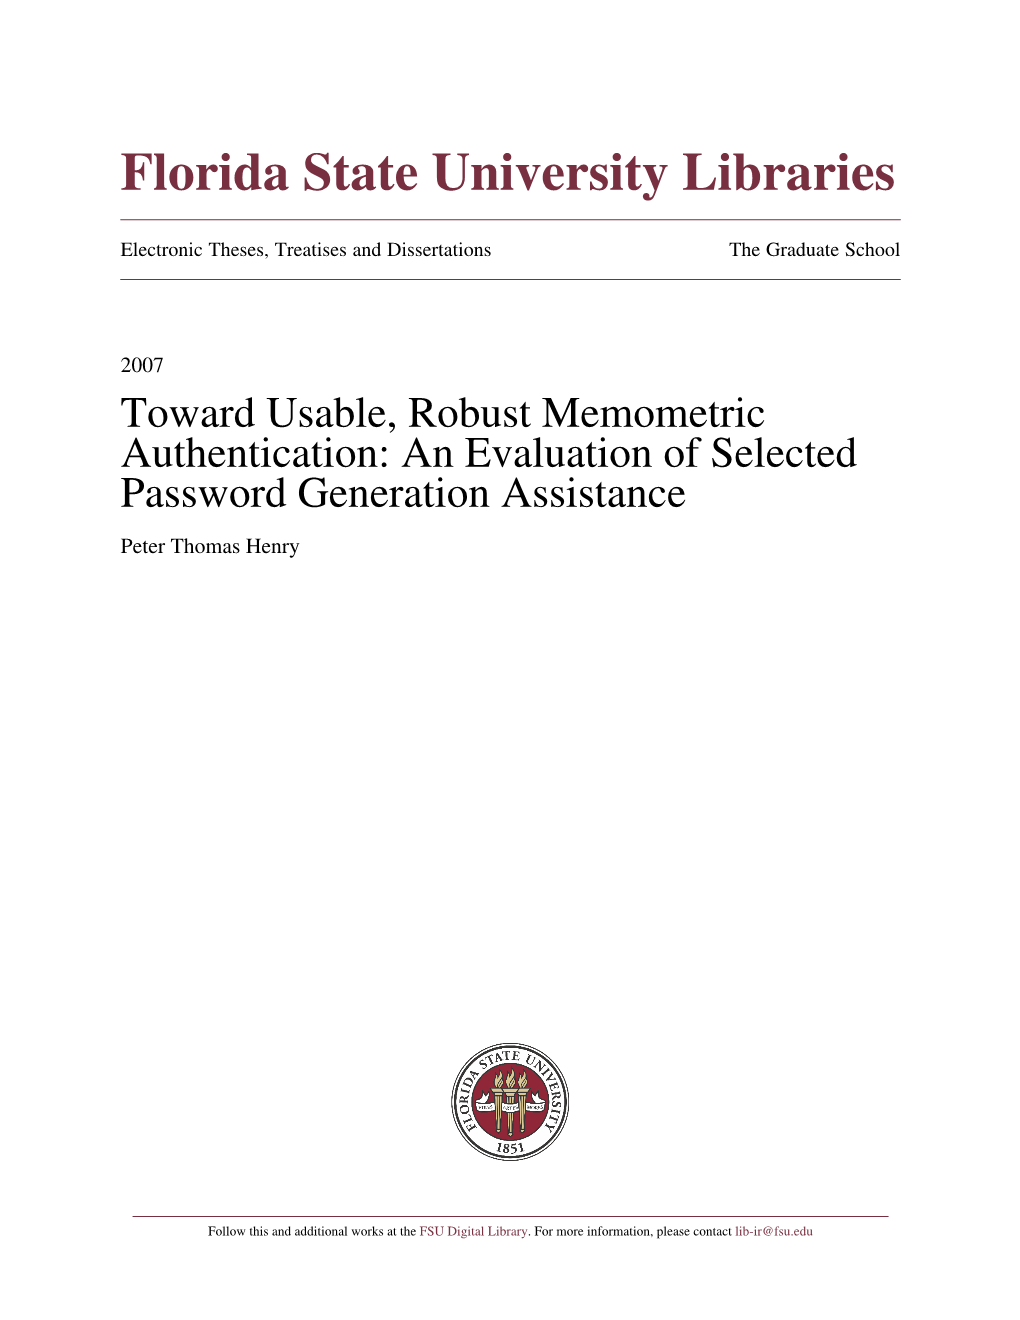 Toward Usable, Robust Memometric Authentication: an Evaluation of Selected Password Generation Assistance Peter Thomas Henry